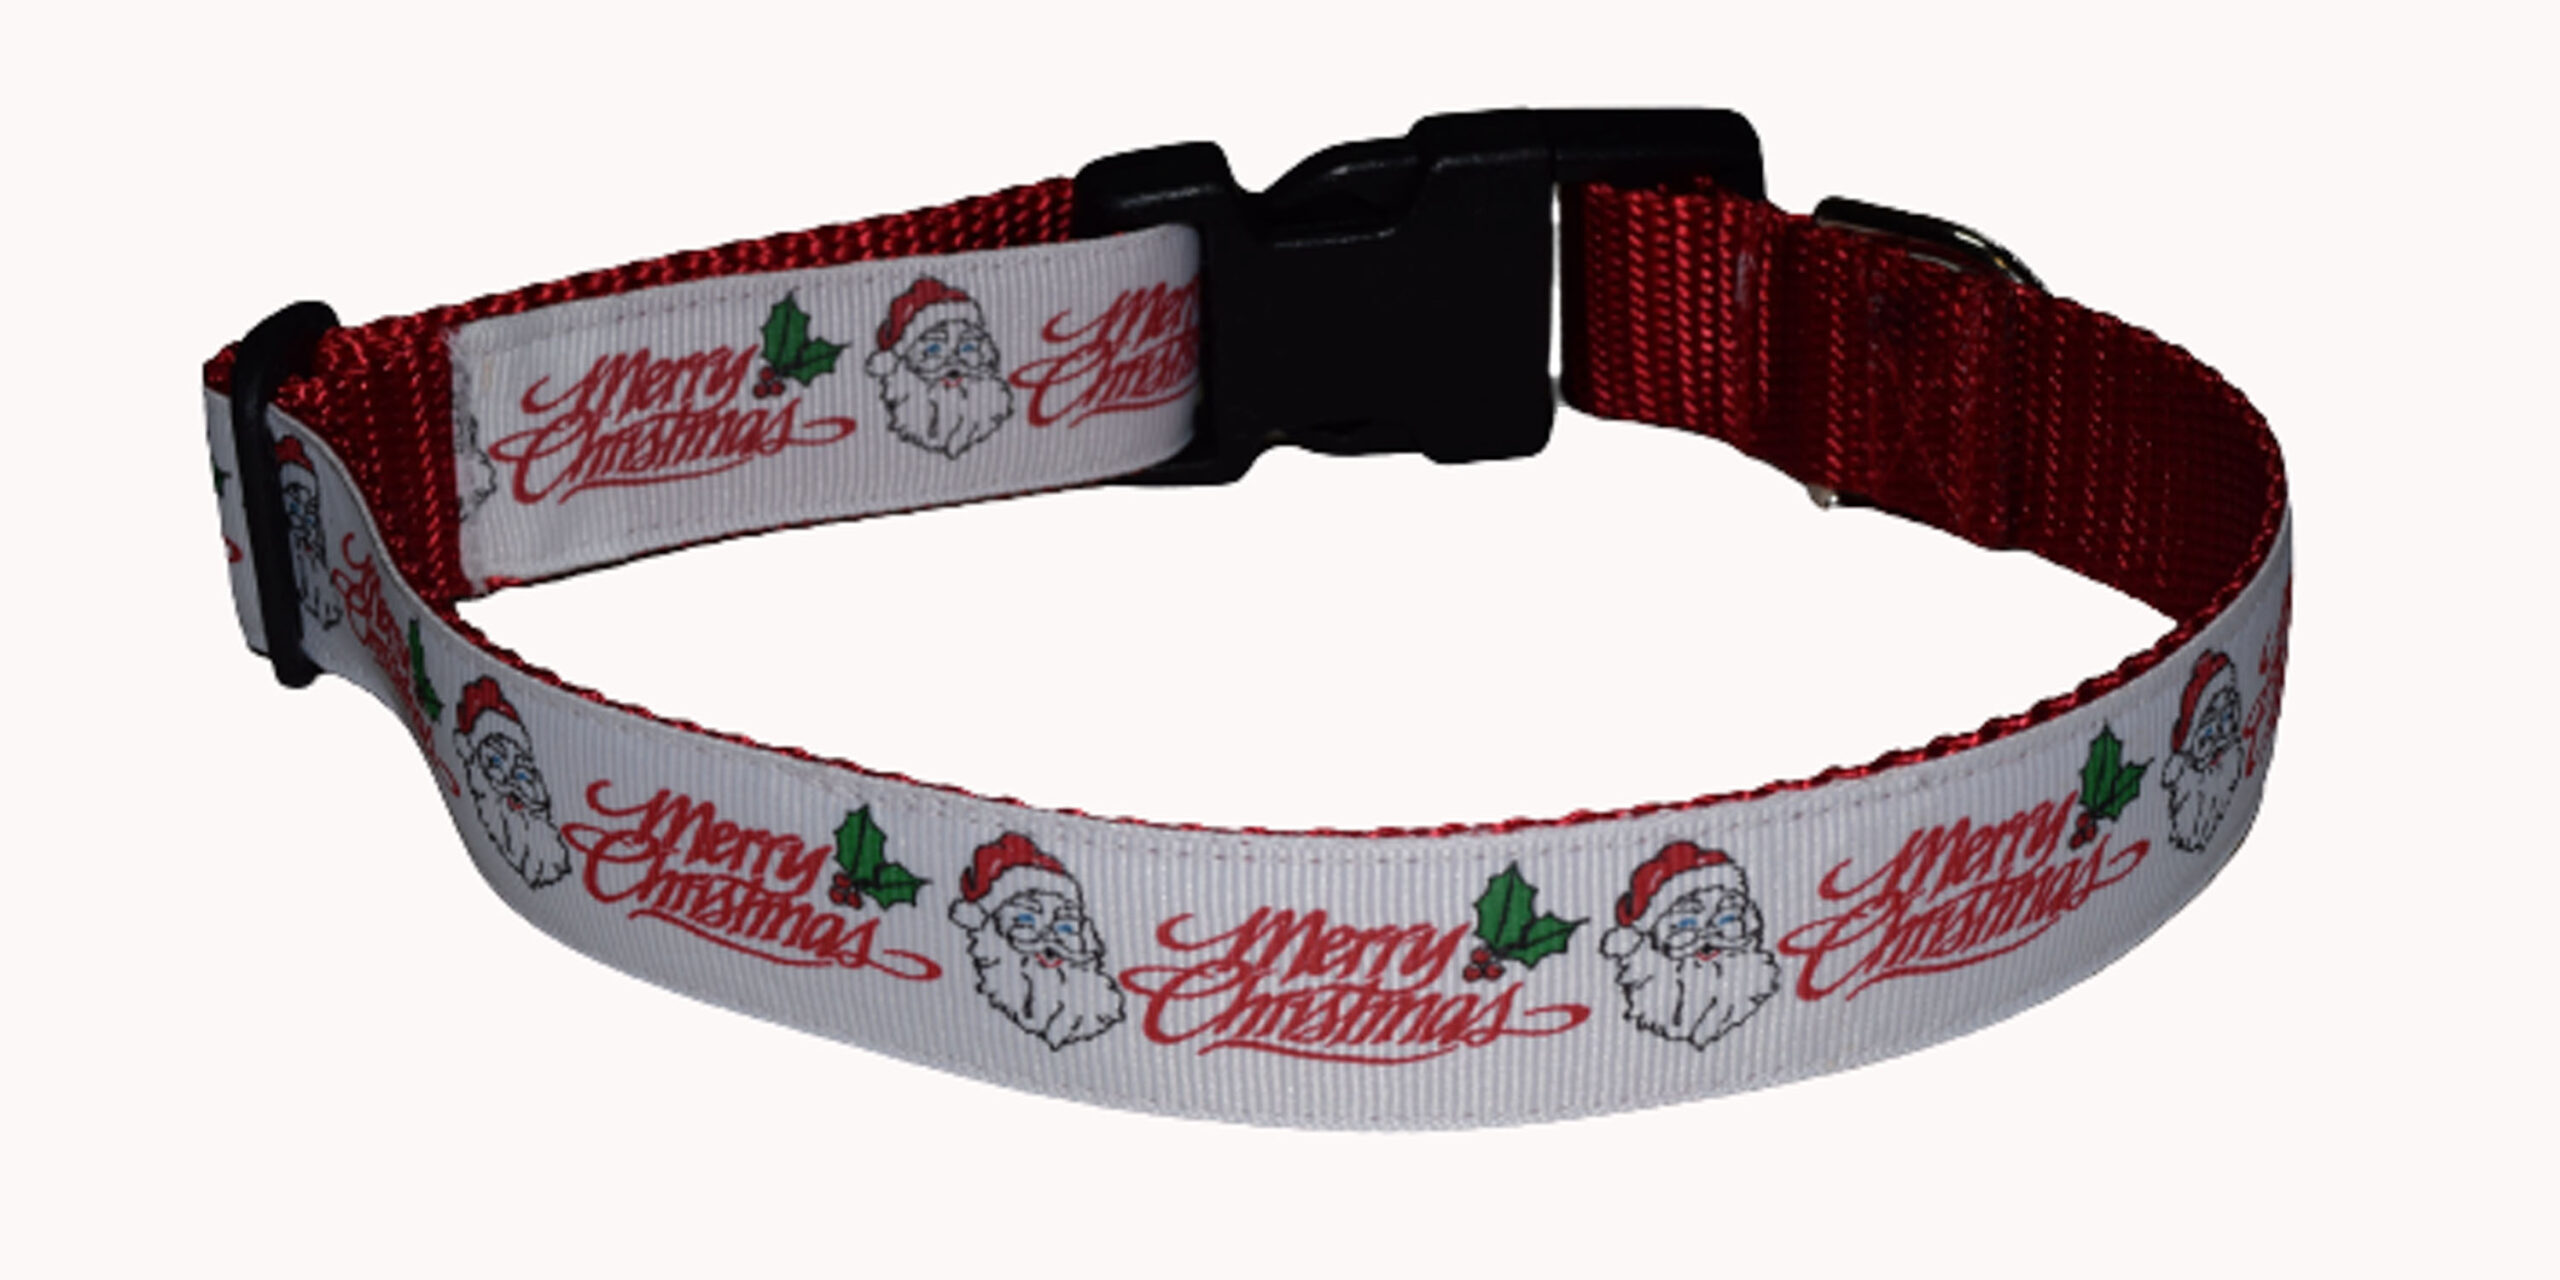 Merry Christmas Dog and Cat Wholesale Collars